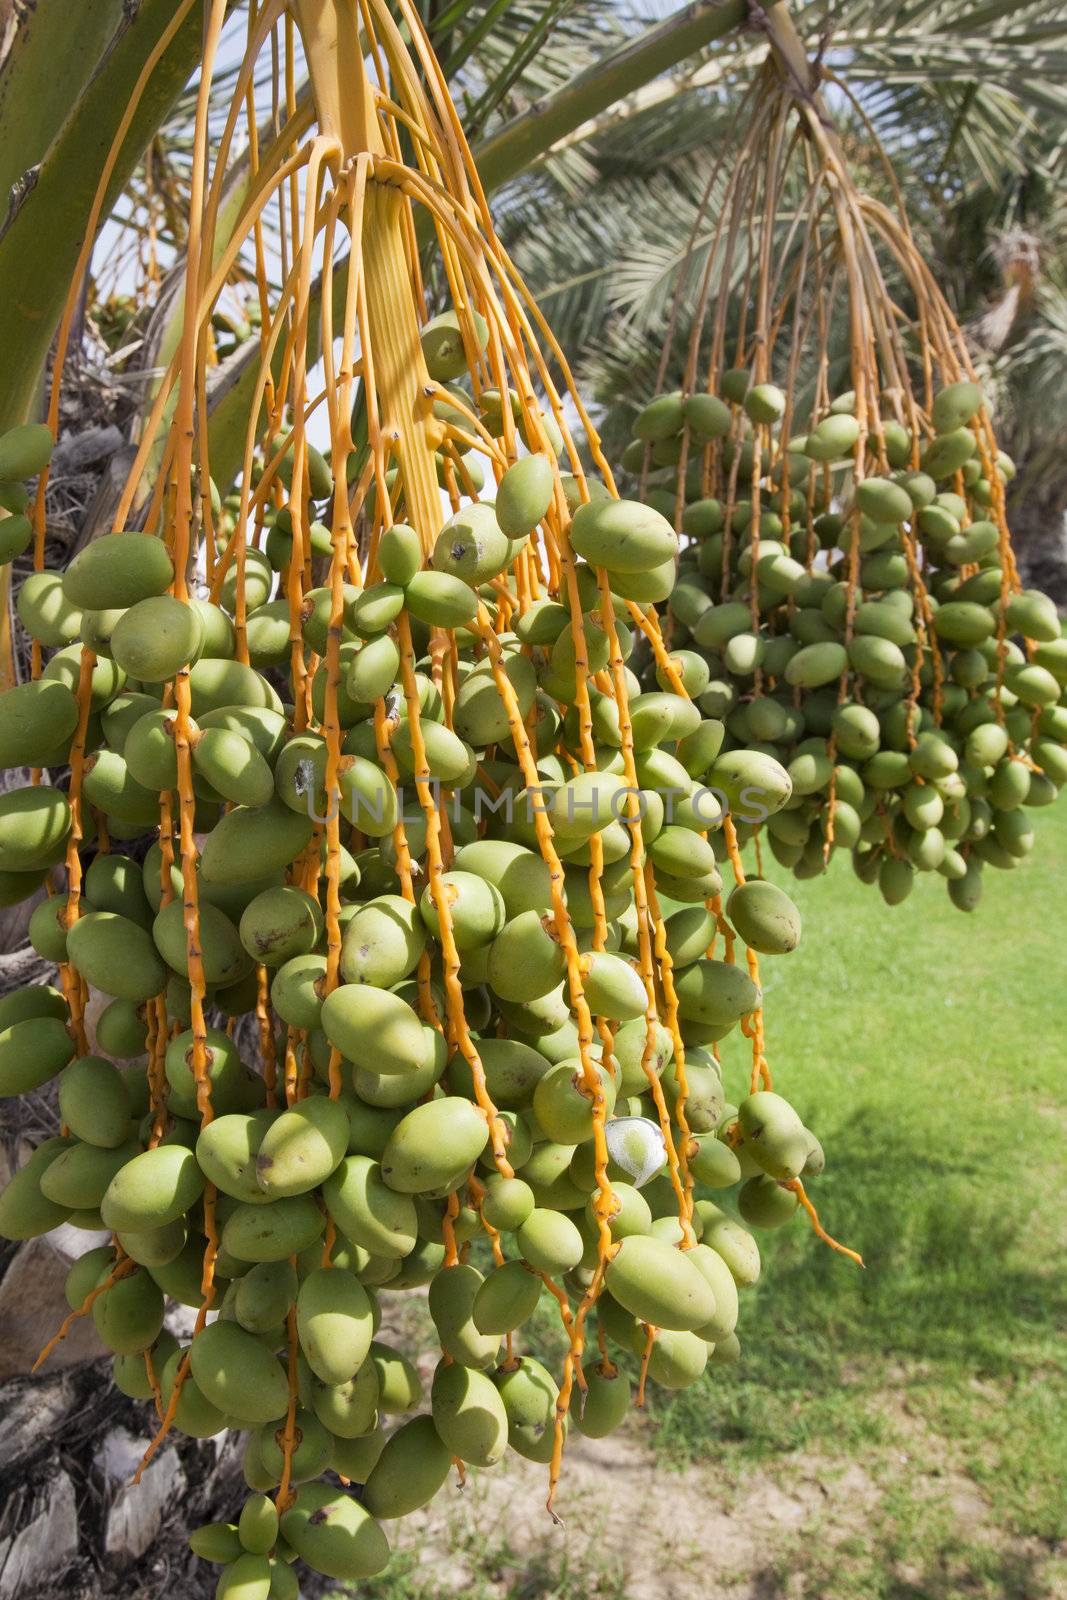 Dates Growing on Trees by shariffc